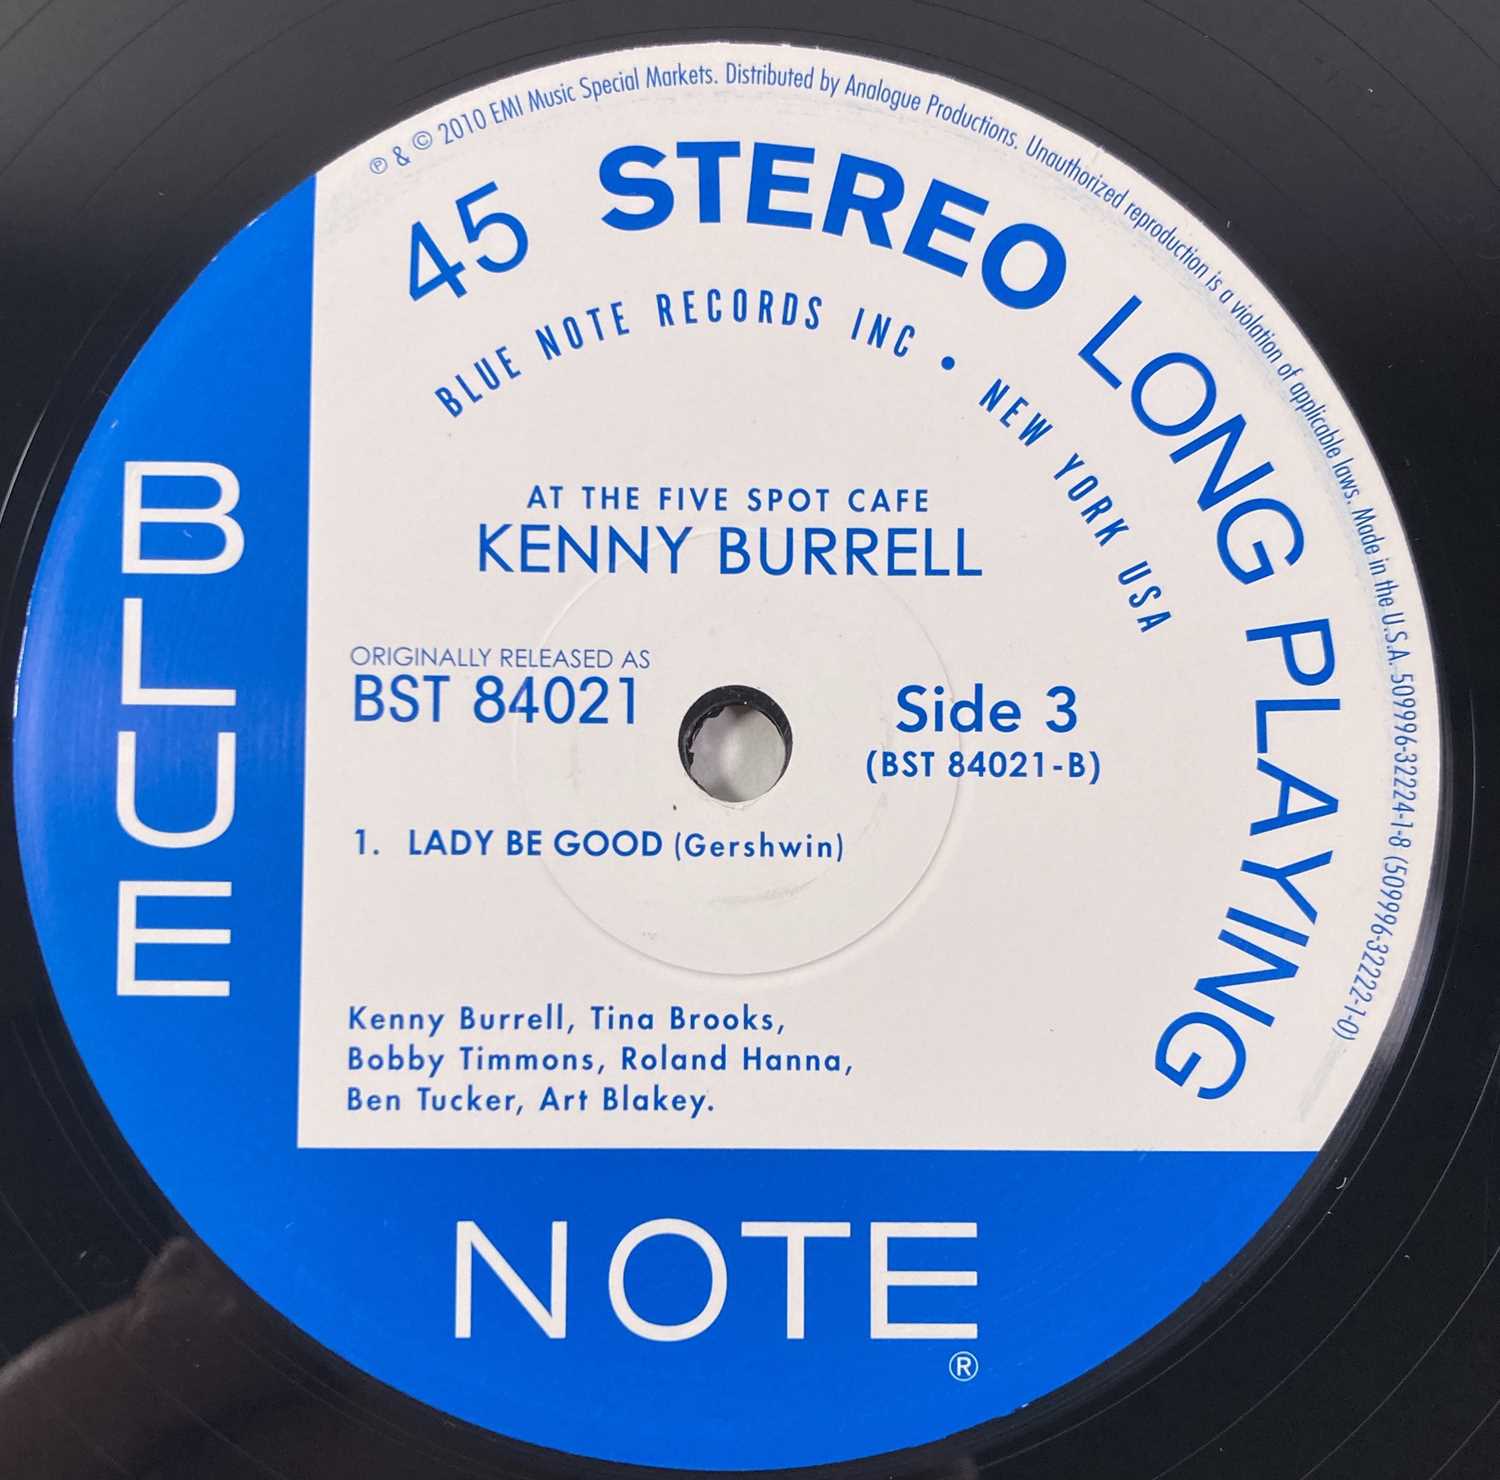 KENNY BURRELL WITH ART BLAKEY - ON VIEW AT THE FIVE SPOT CAFE LP (2010 LTD EDITION PRESSING - 509996 - Image 8 of 8